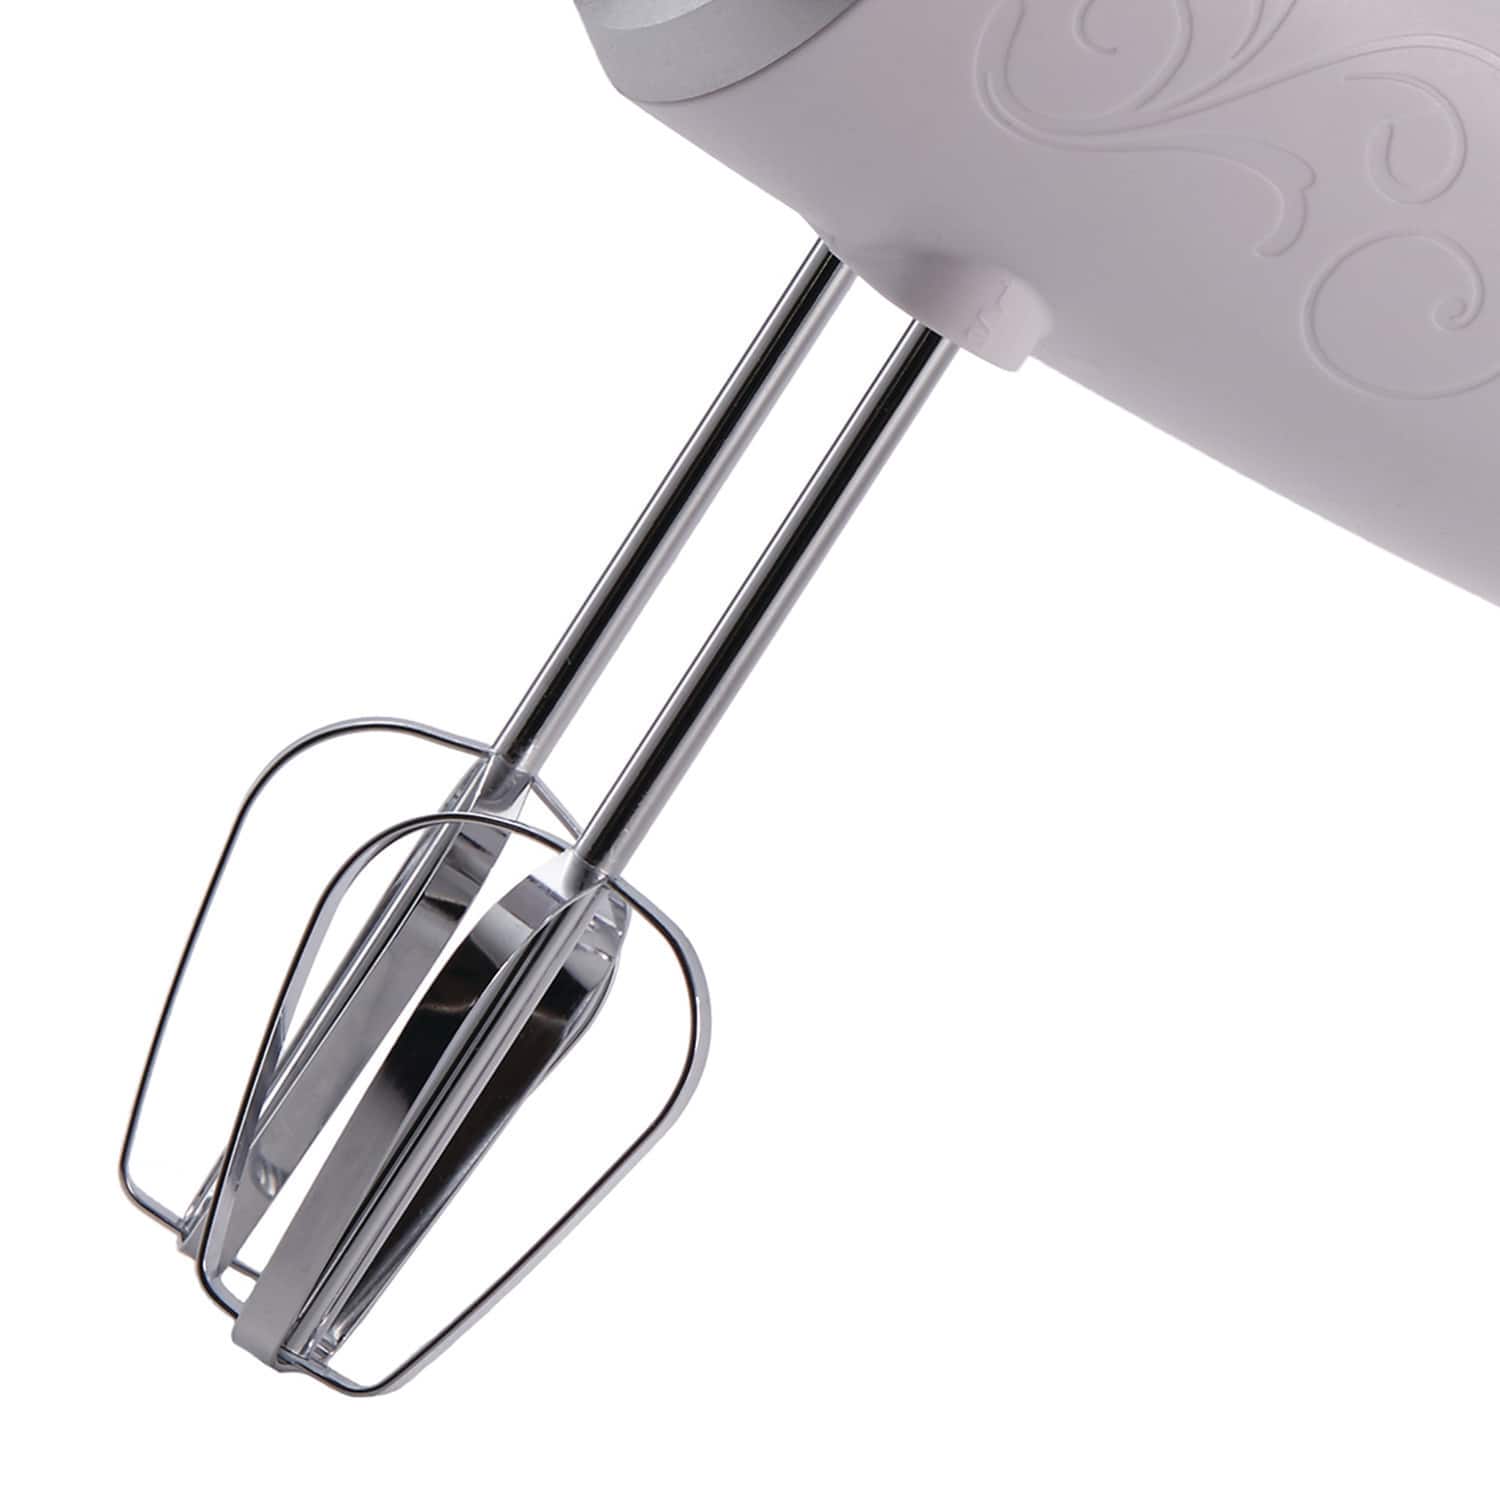 Brentwood White Lightweight 5-Speed Electric Hand Mixer